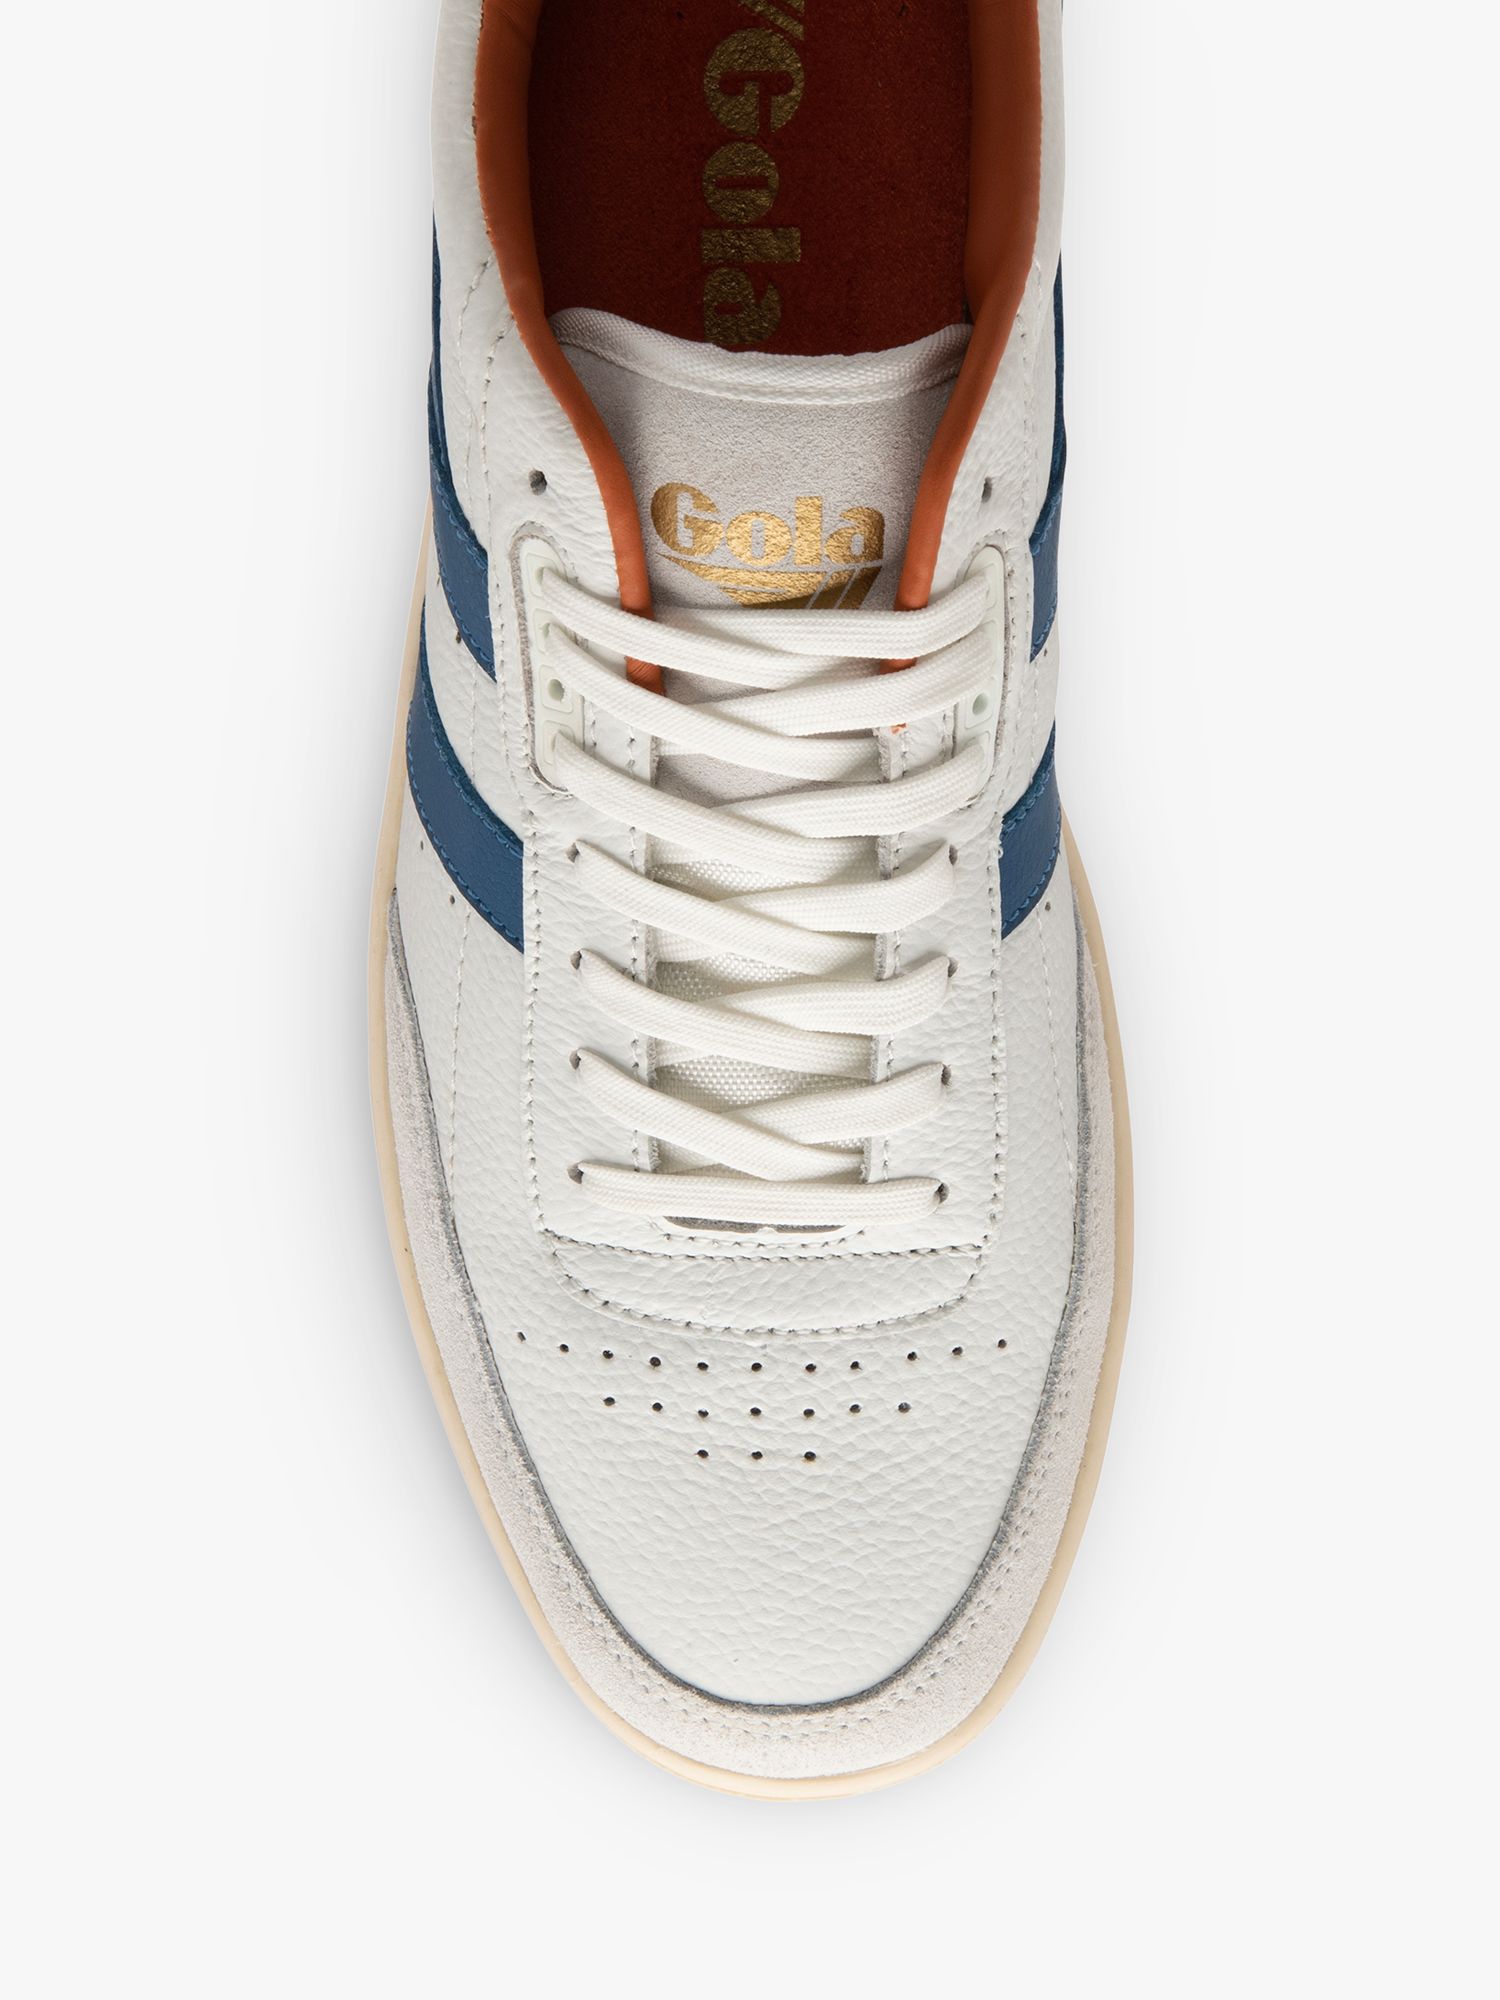 Gola Classics Contact Leather Lace Up Trainers, White/Blue/Orange, 6